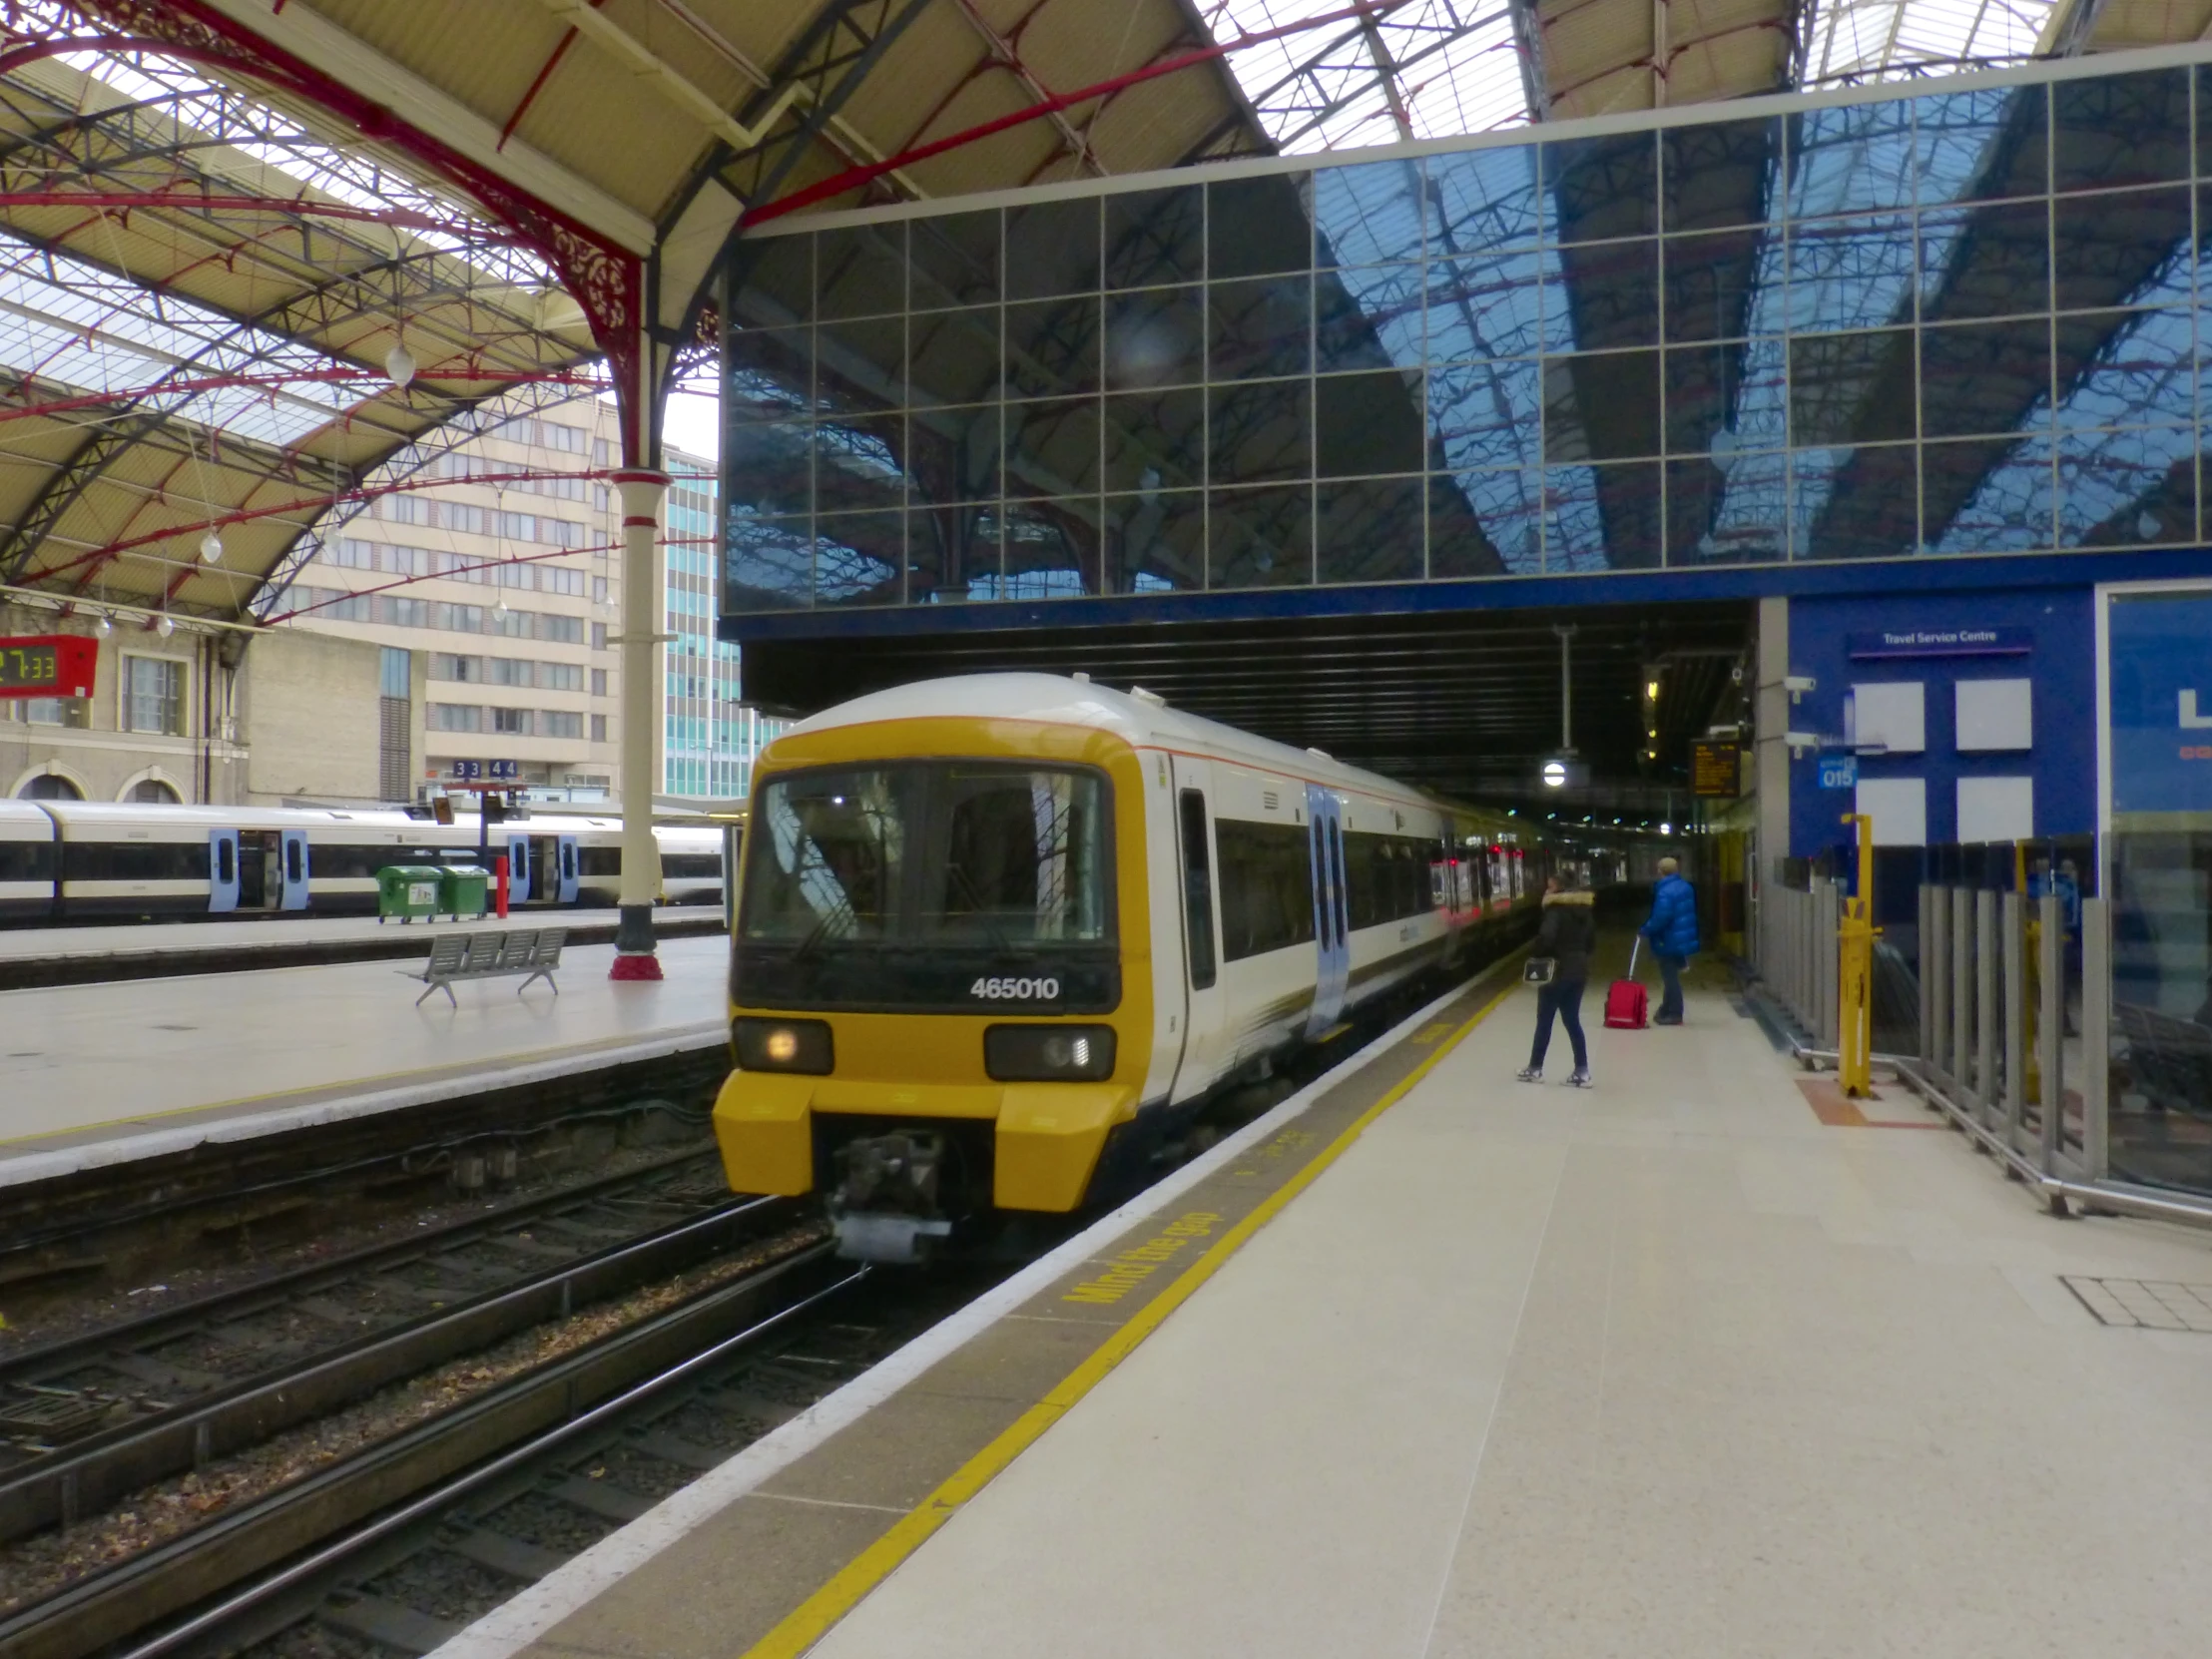 two trains stopped at a train station, the one in yellow is pulling up to the platform